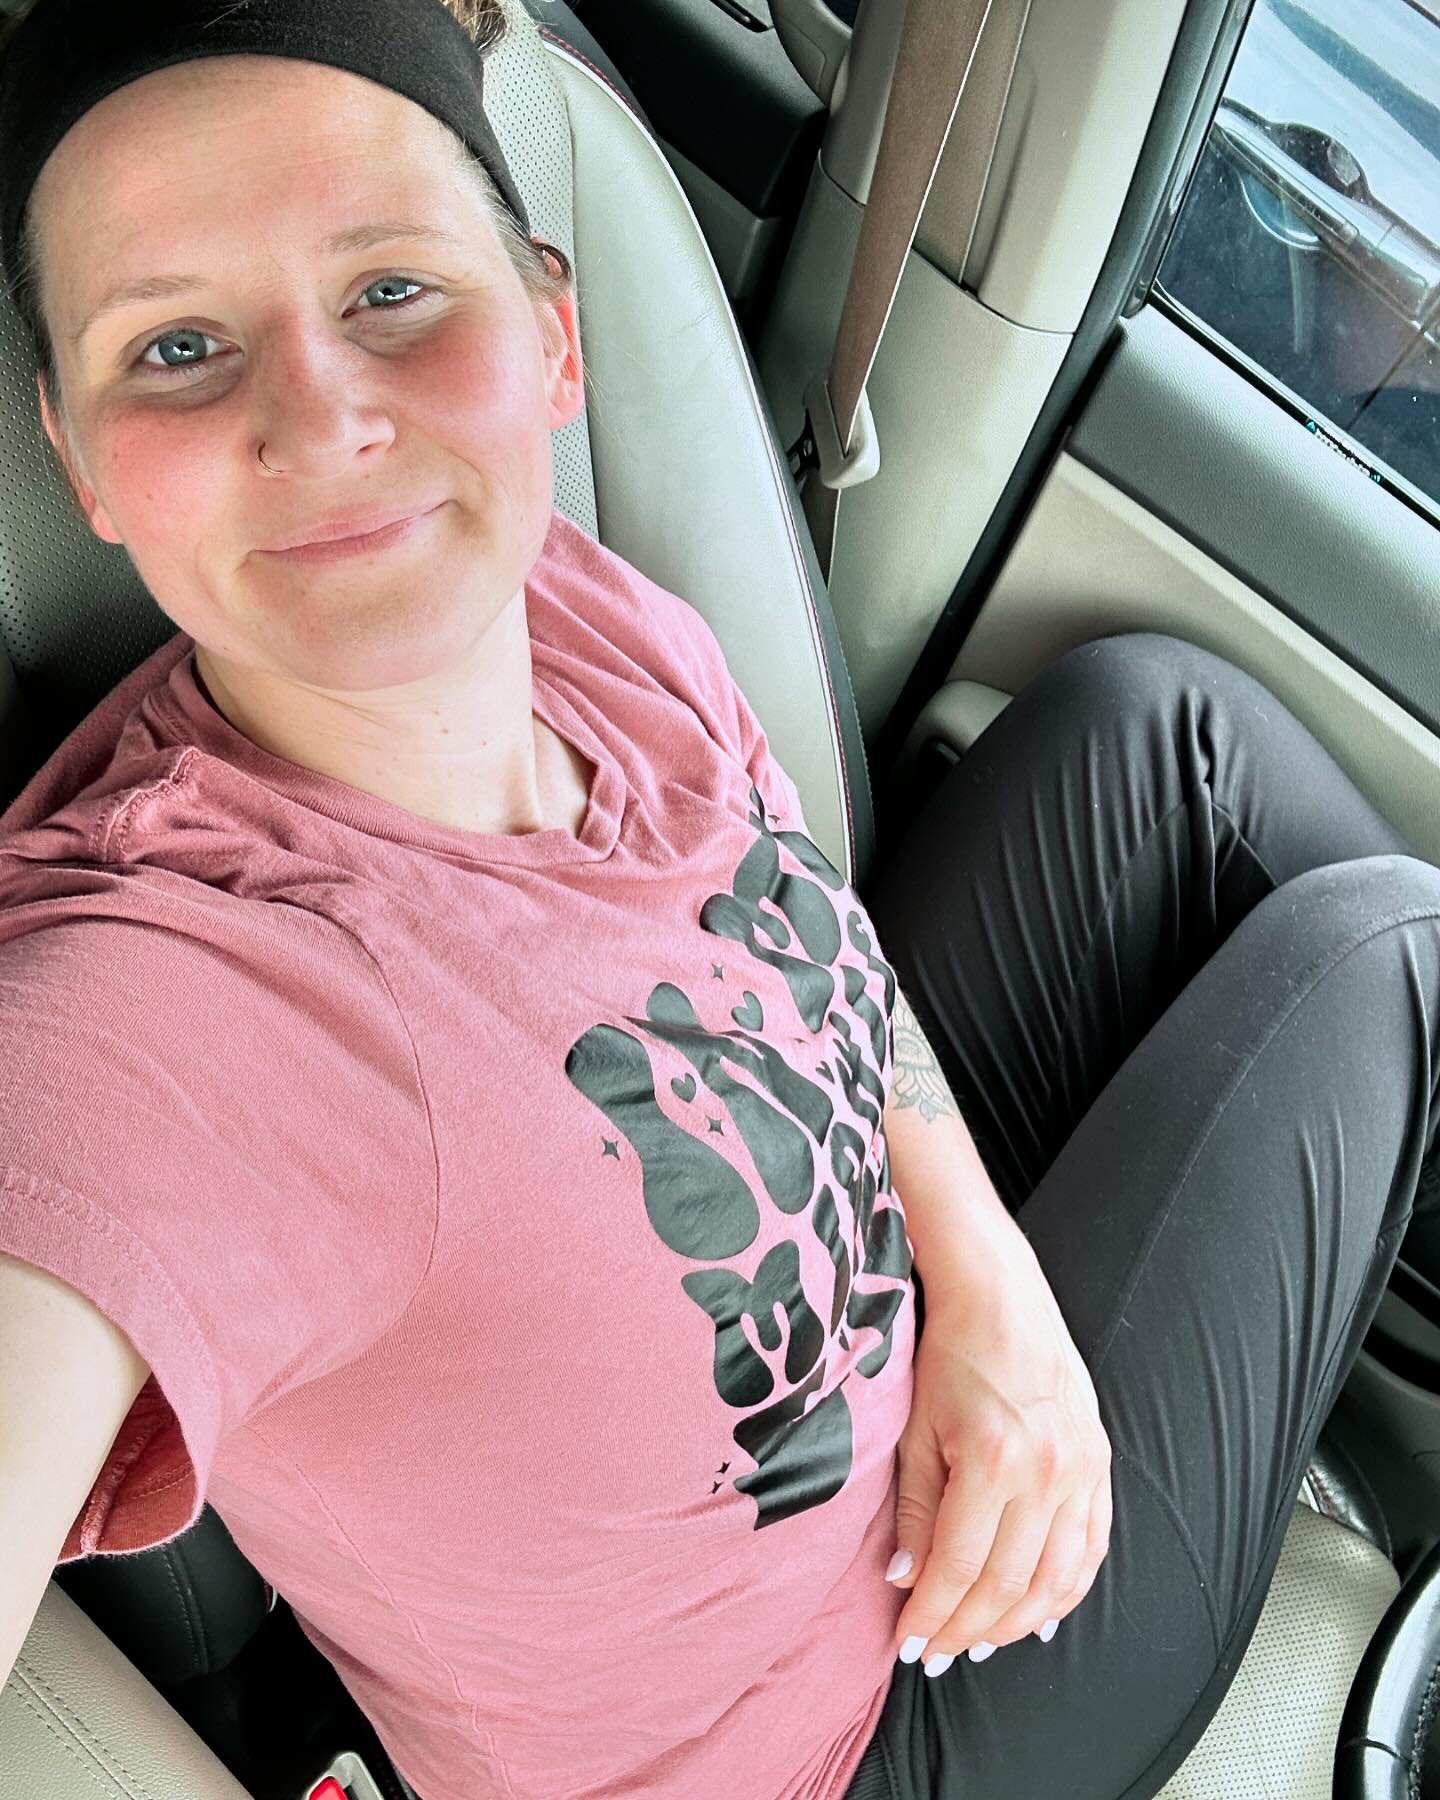 Sometimes being a midwife looks like a 30 min car nap while your toddler is at speech because you&rsquo;re a zombie after pulling an all nighter supporting a strong mama in labor.